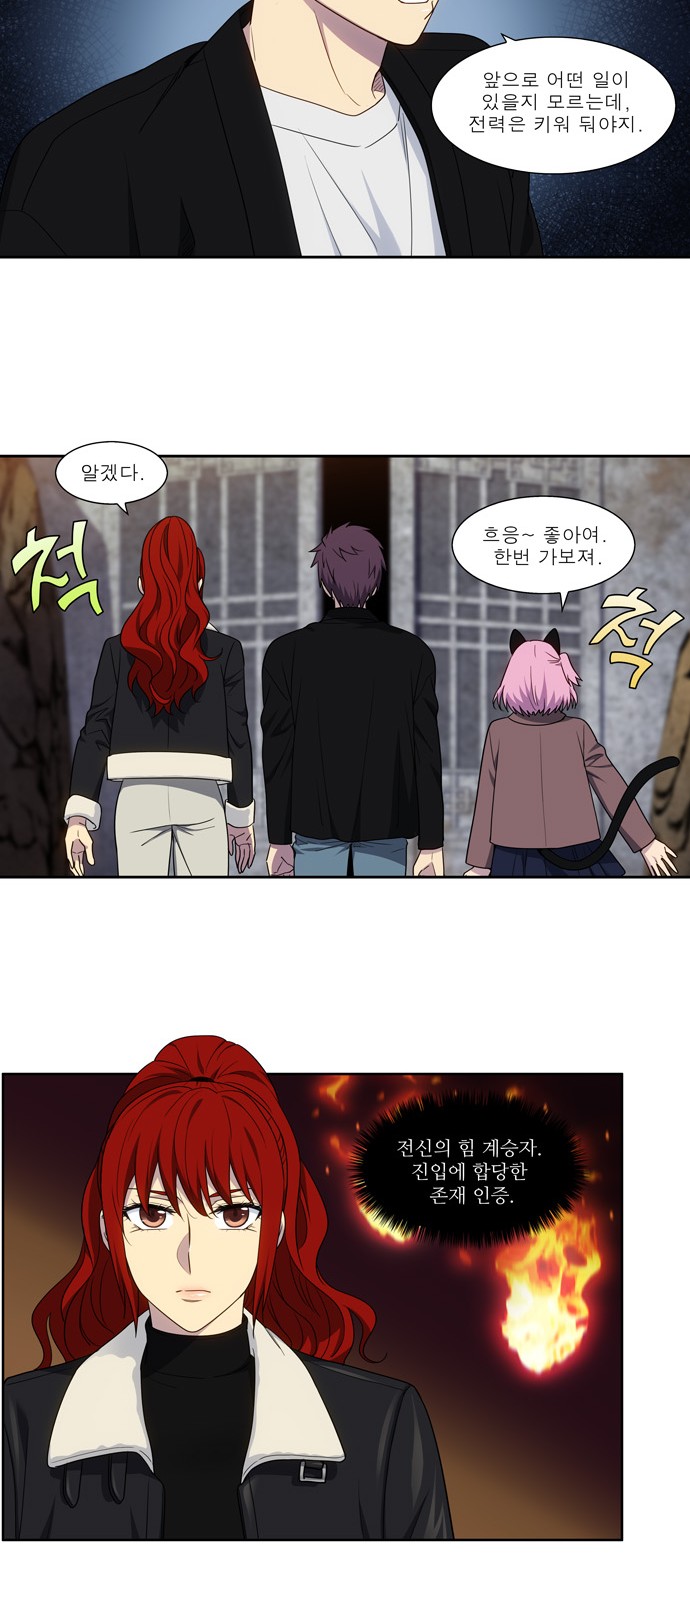 The Gamer - Chapter 410 - Page 4